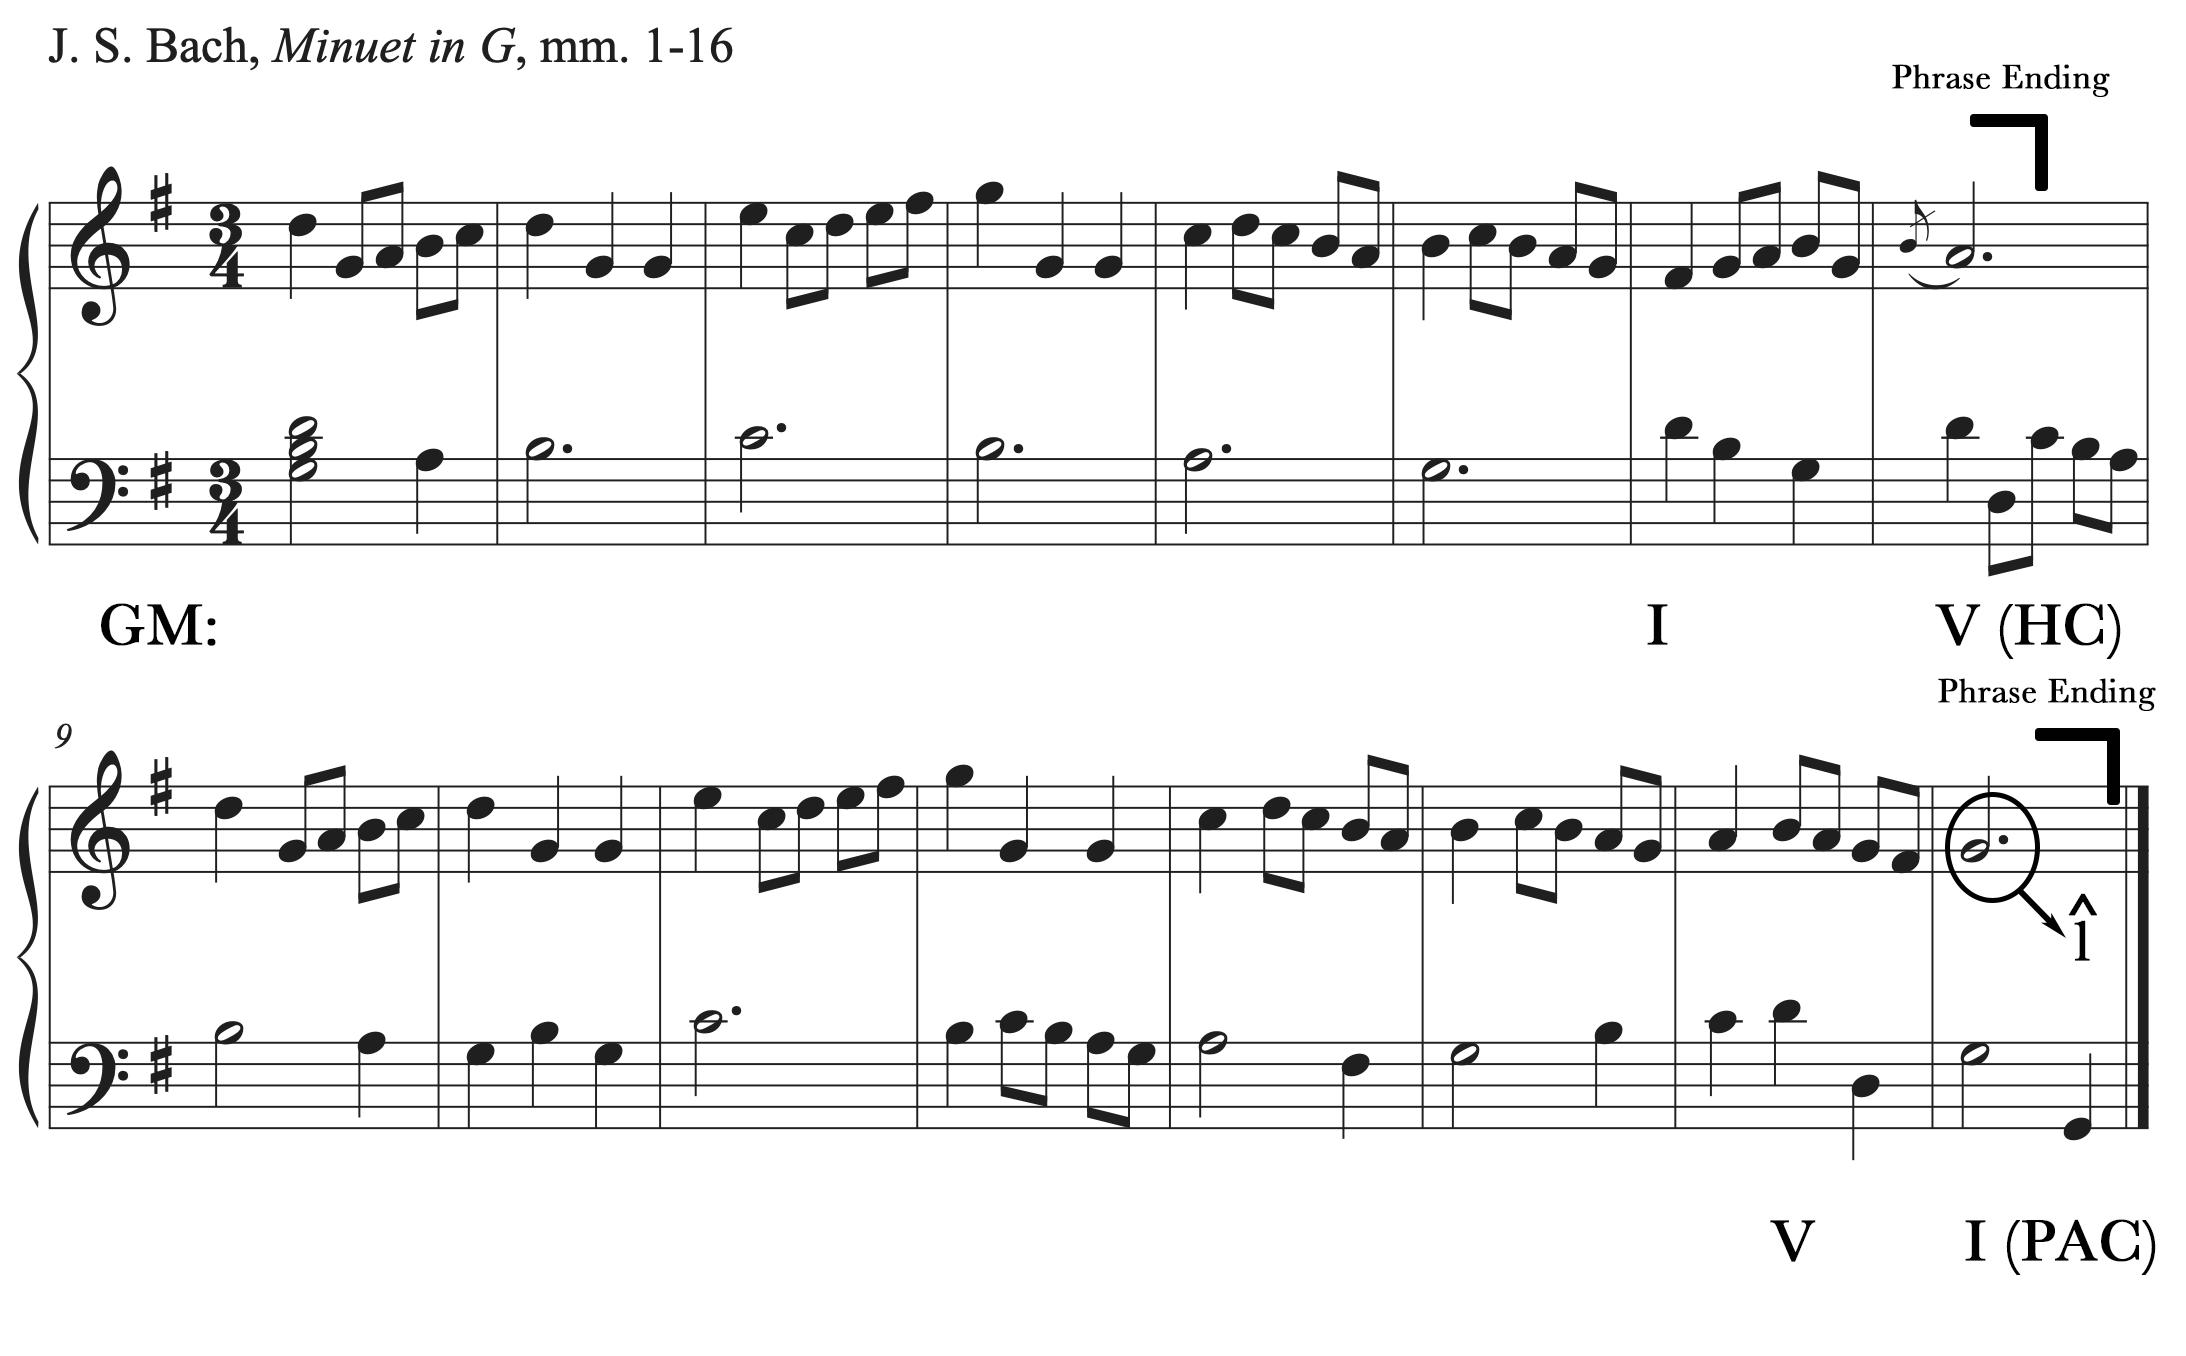 The Bach Minuet excerpt with cadences labeled in bars 8 and 16 is shown.